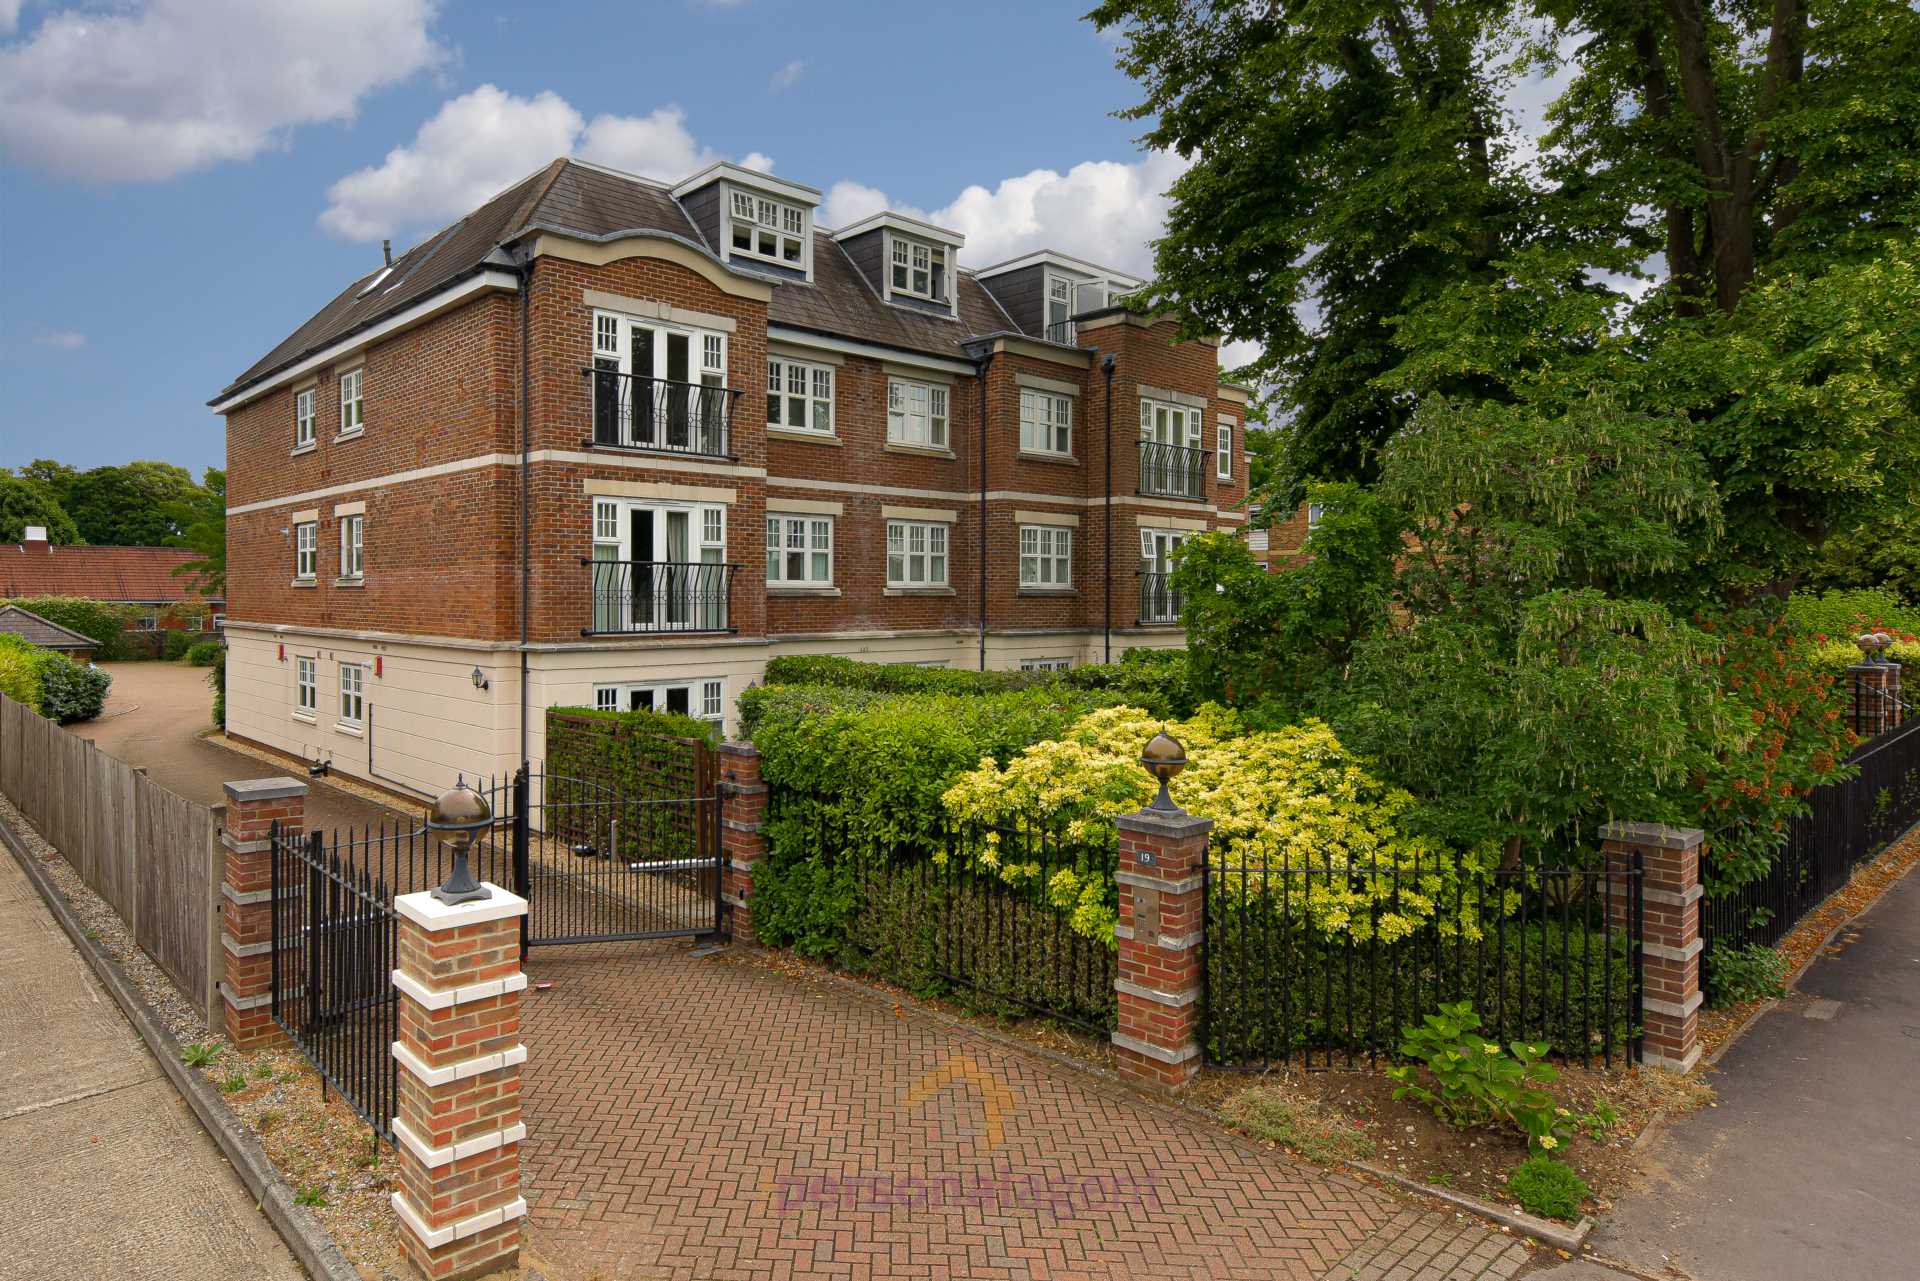 2 bed Apartment for rent in Epsom. From The Personal Agent - Epsom